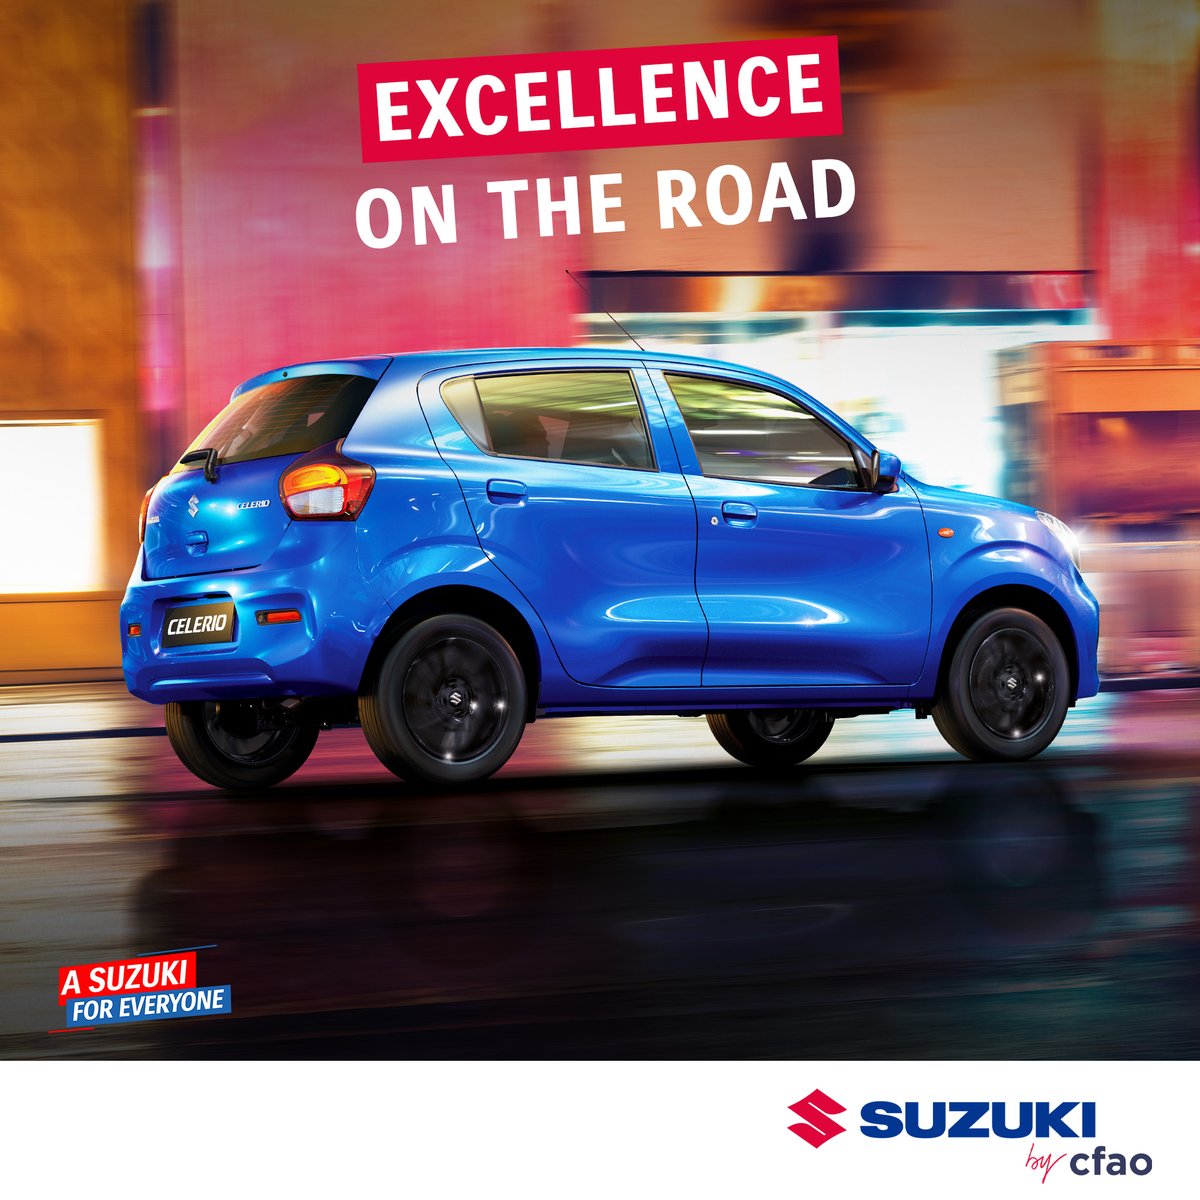 Suzuki  by CFAO, where innovation and performance come together to create a  driving experience that surpasses all others. Discover excellence on the  road. 📷📷 #SuzukiInnovation #ExceptionalPerformance